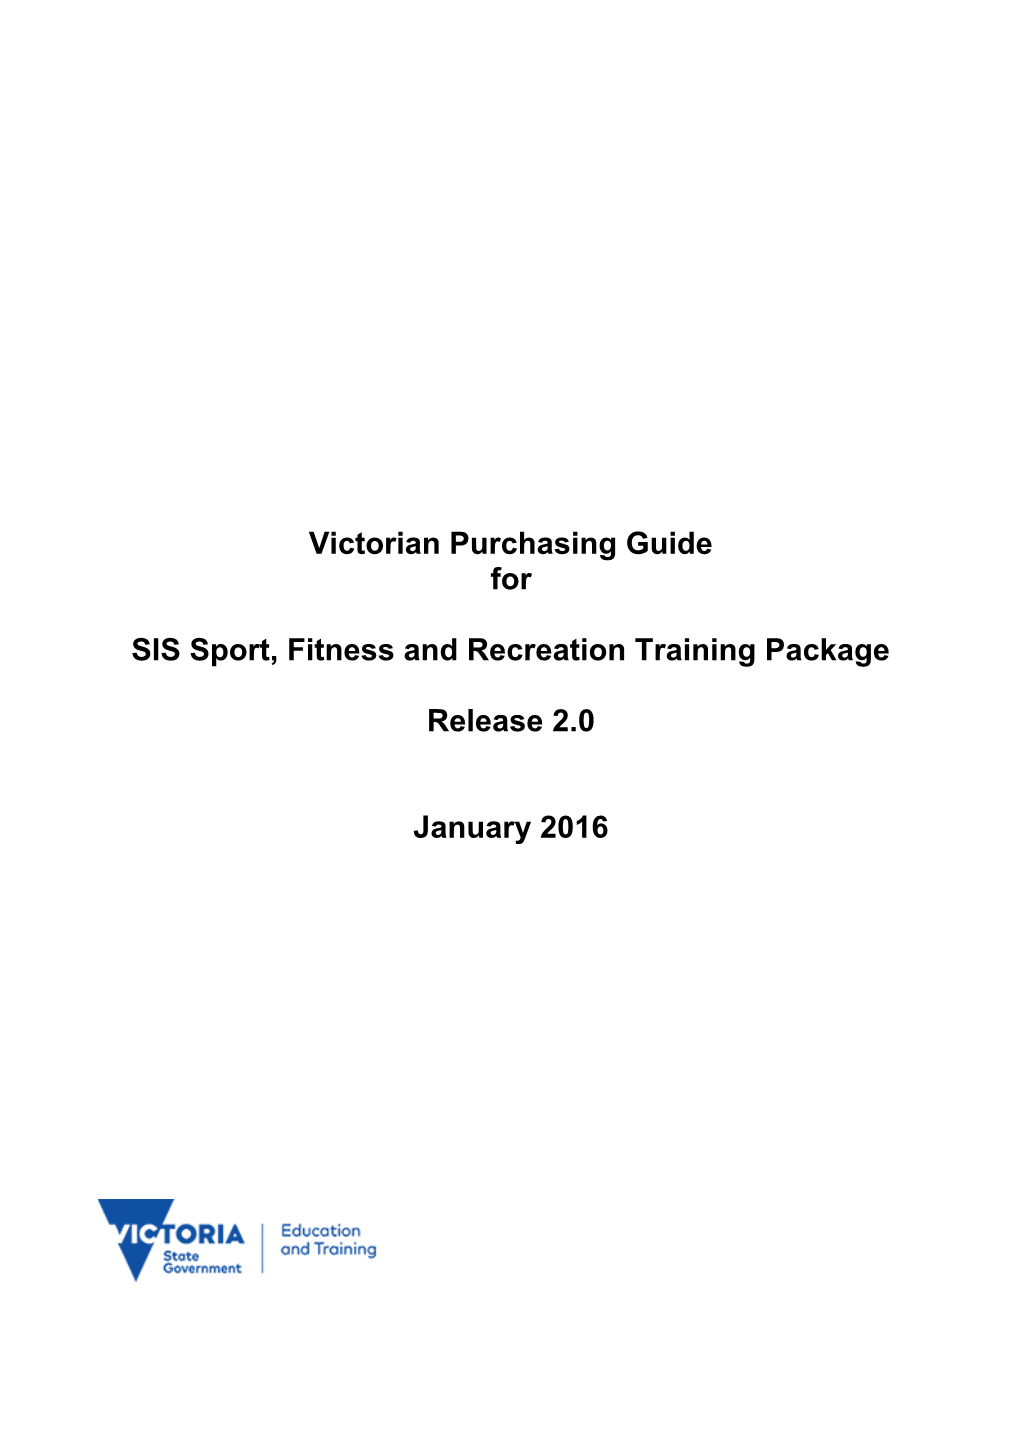 Victorian Purchasing Guide for SIS Sport, Fitness and Recreation